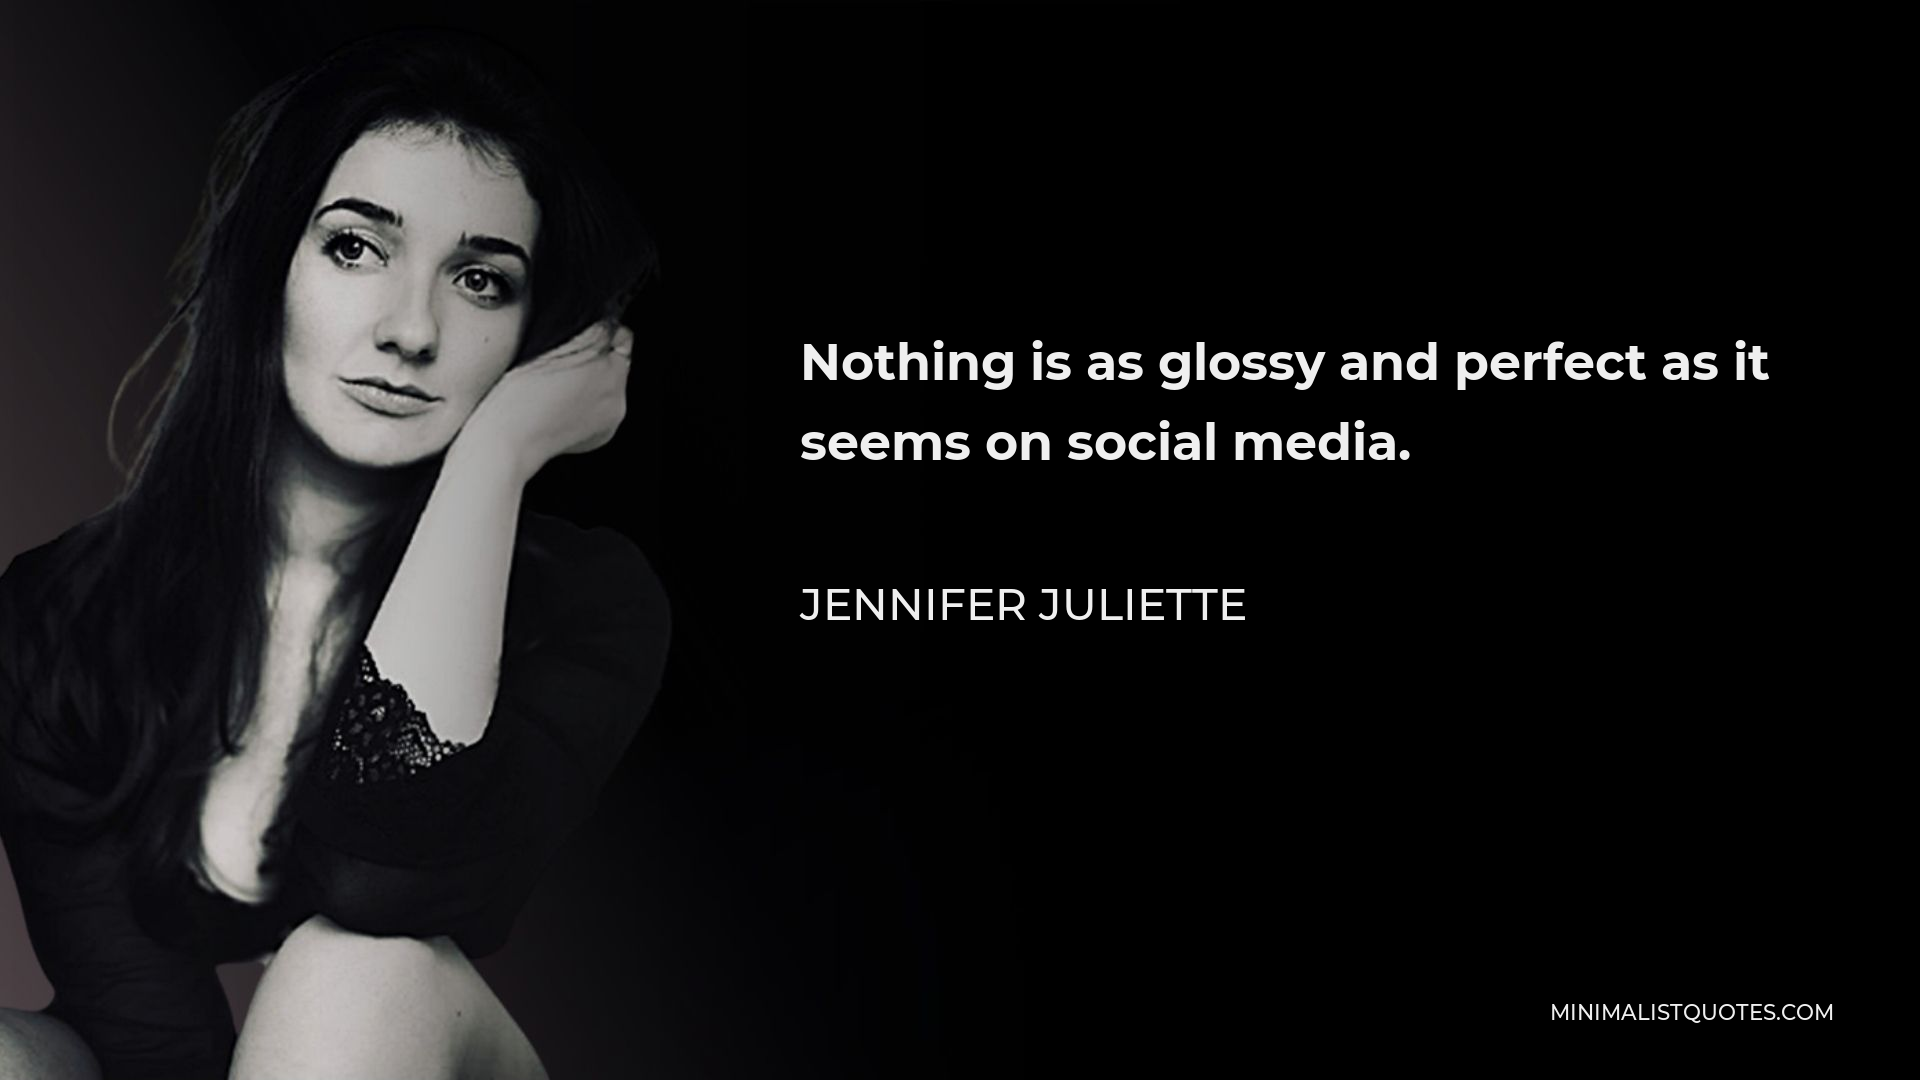 Jennifer Juliette Quote - Nothing is as glossy and perfect as it seems on social media.